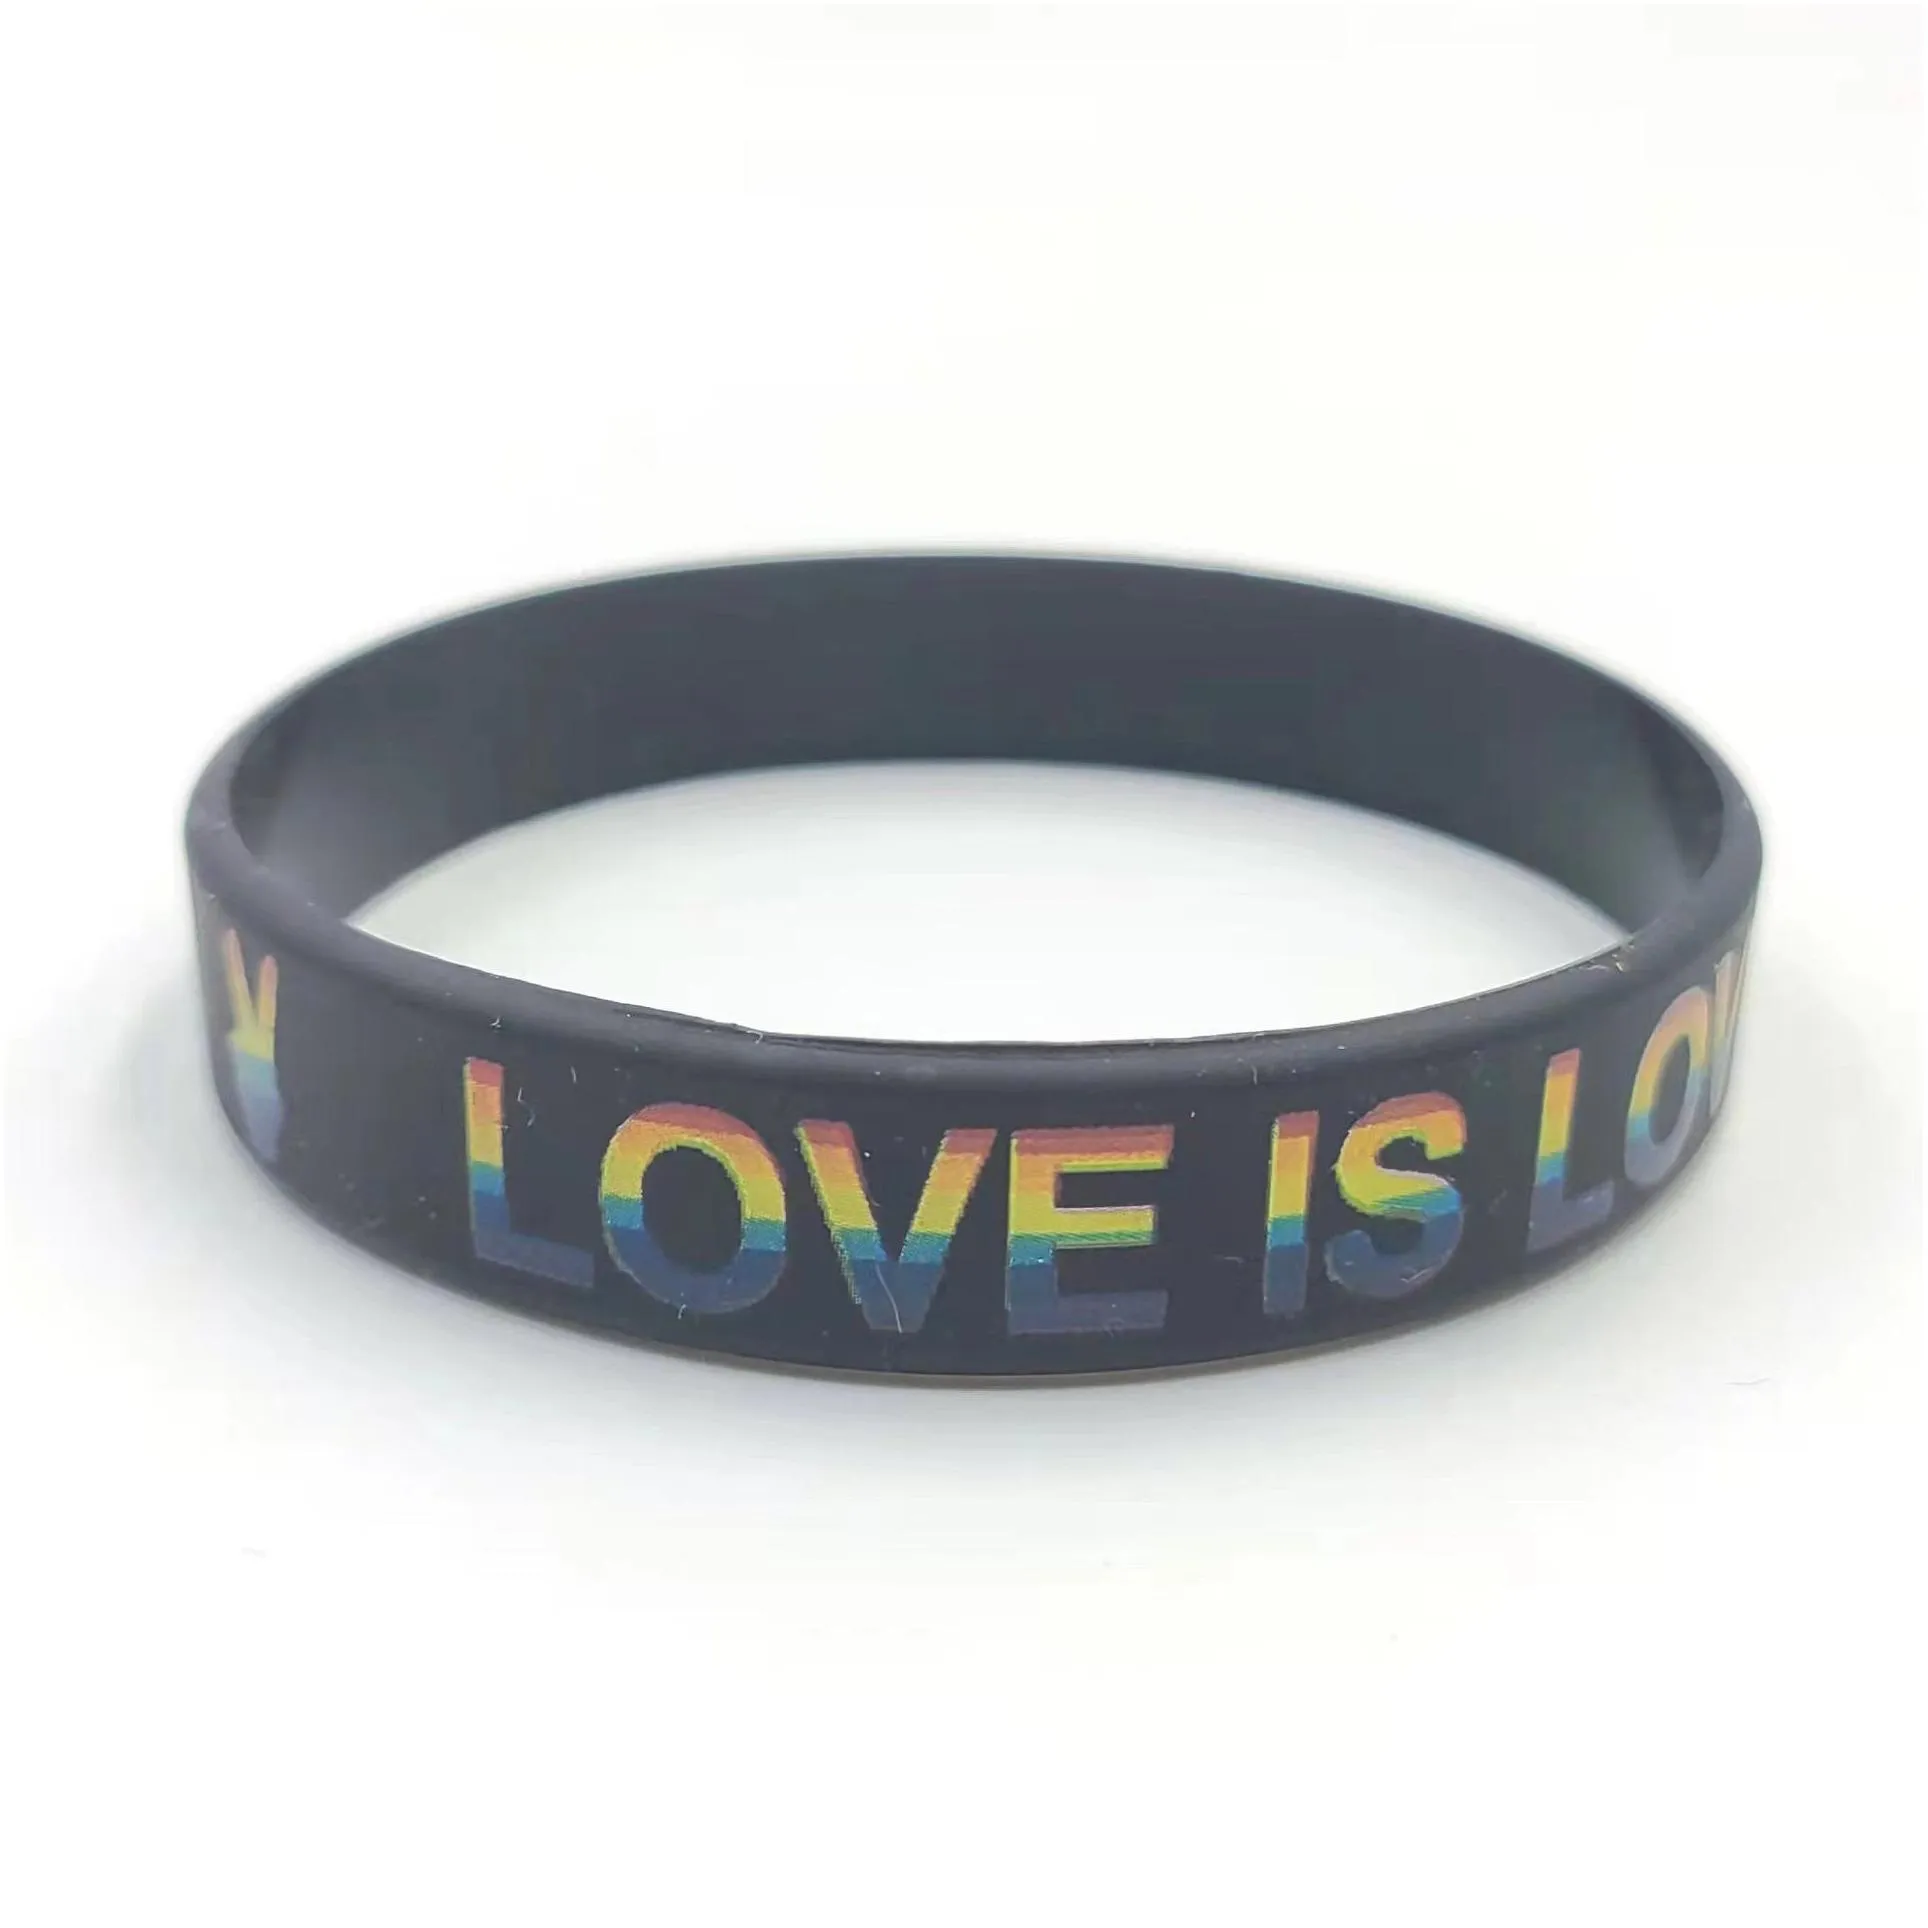 10 styles lgbt silicone rainbow bracelet party favor colorful wristband gay lesbian pride wristbands